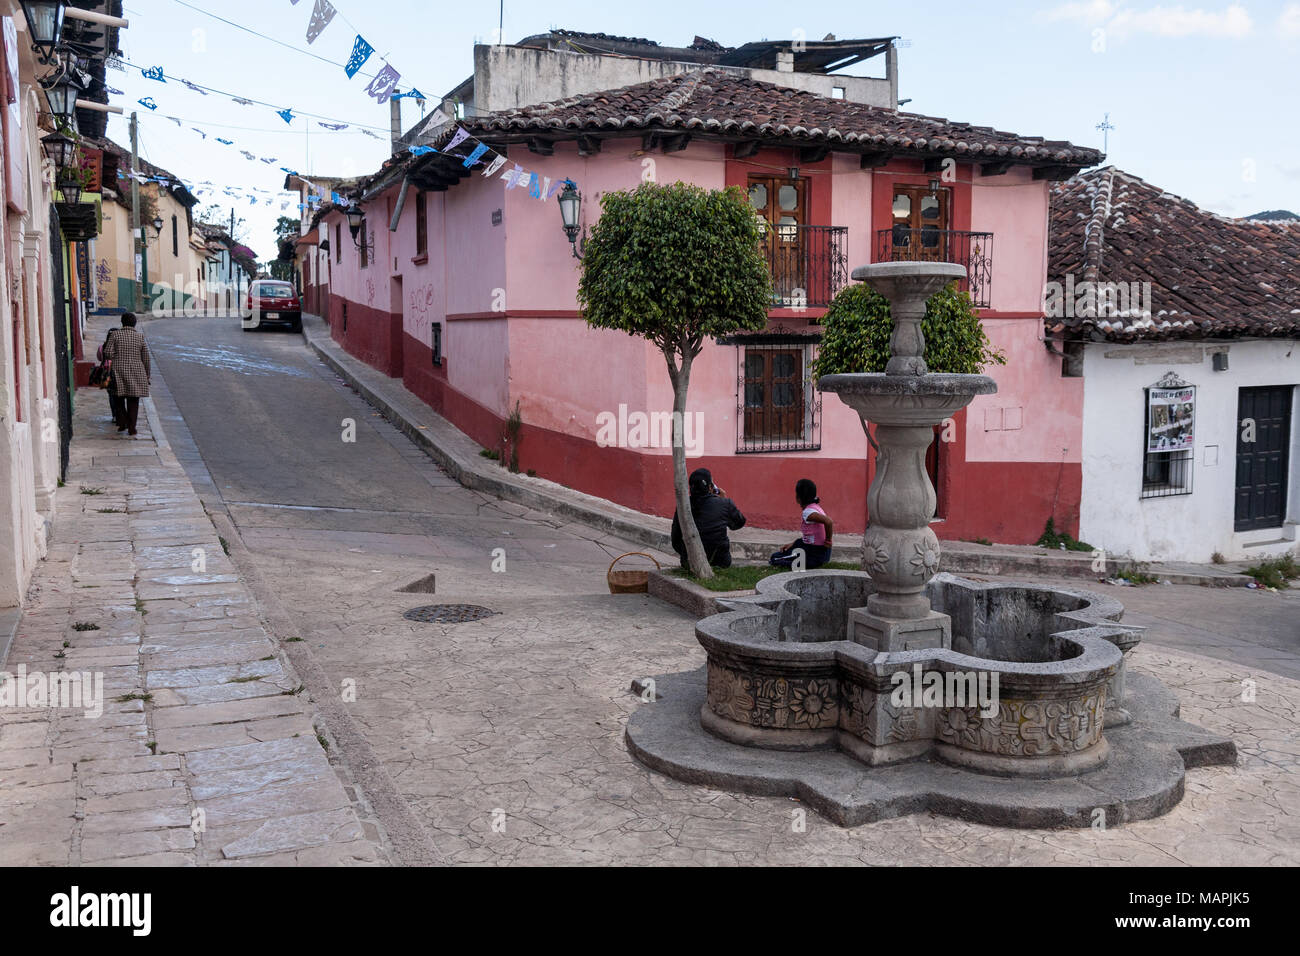 SAN CRISTOBAL, MEXICO - March 8, 2012:  Local mexicans rest at the foutain on a street in San Cristobal De las Casas, Mexico. Stock Photo